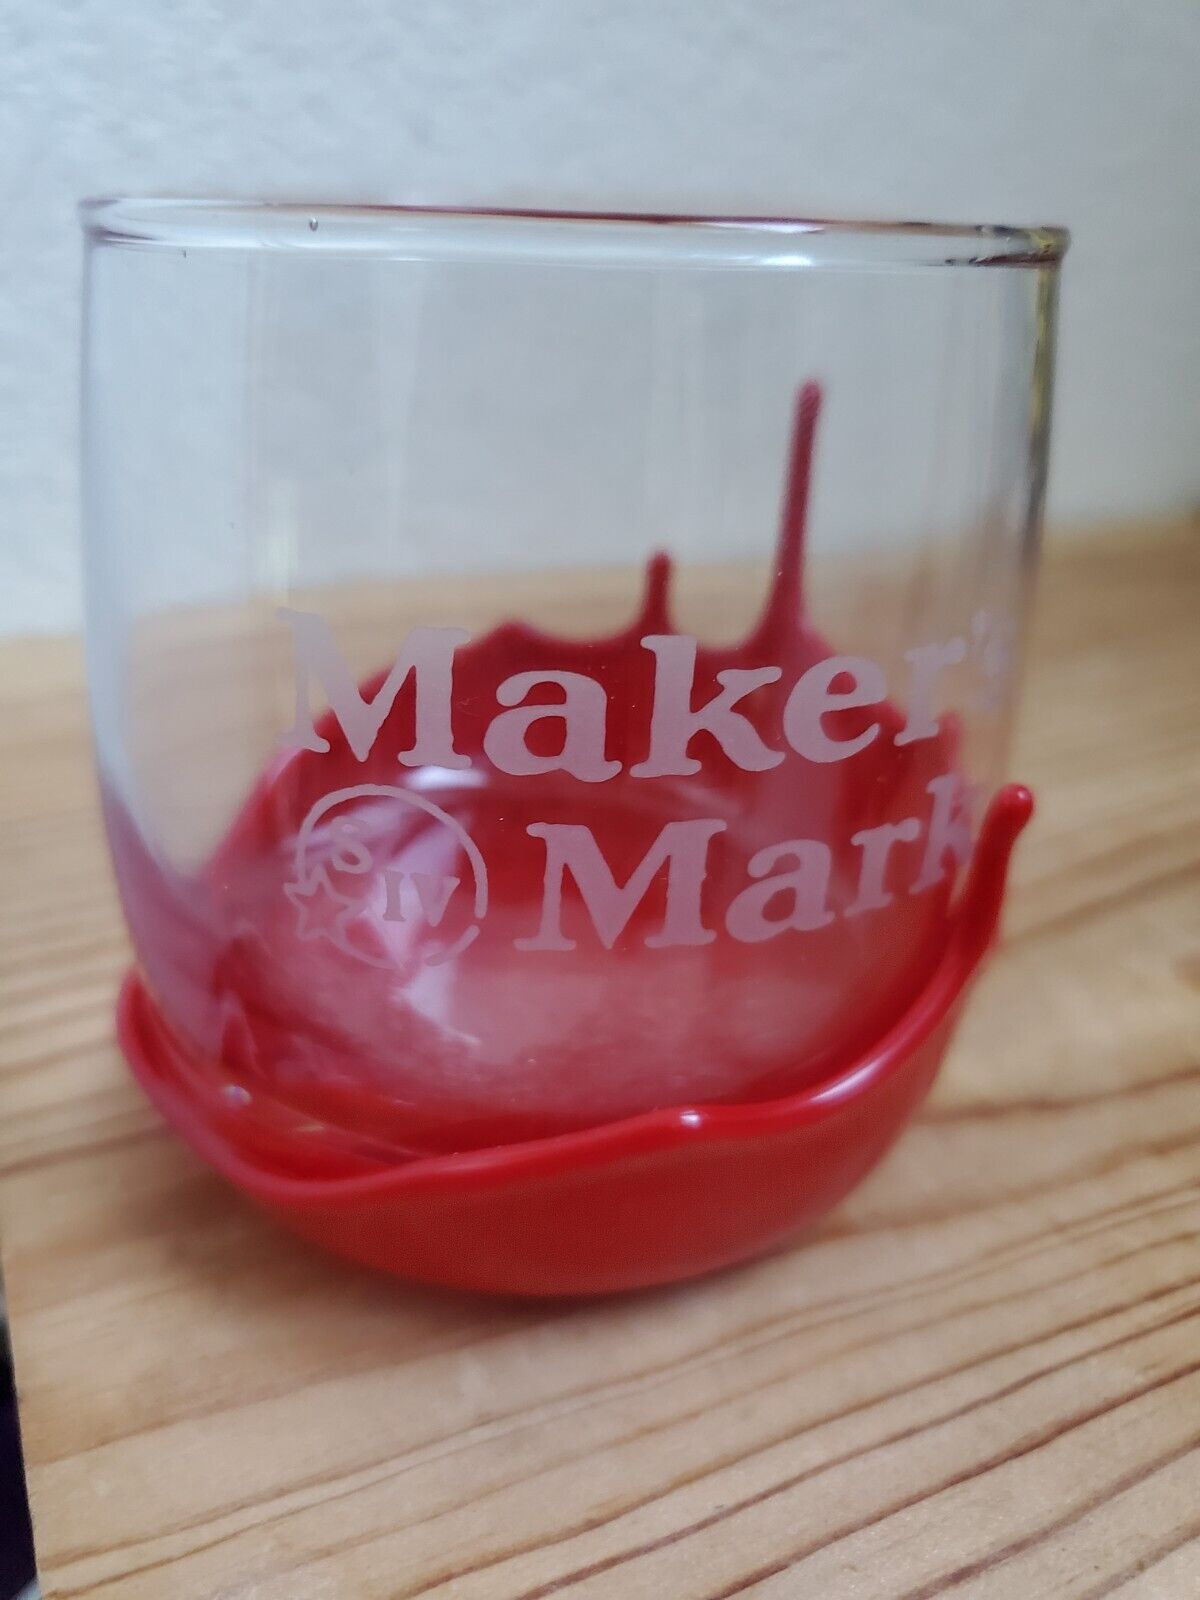 Maker‘s Mark Melted Red Wax Whisky Bourbon Glass New!